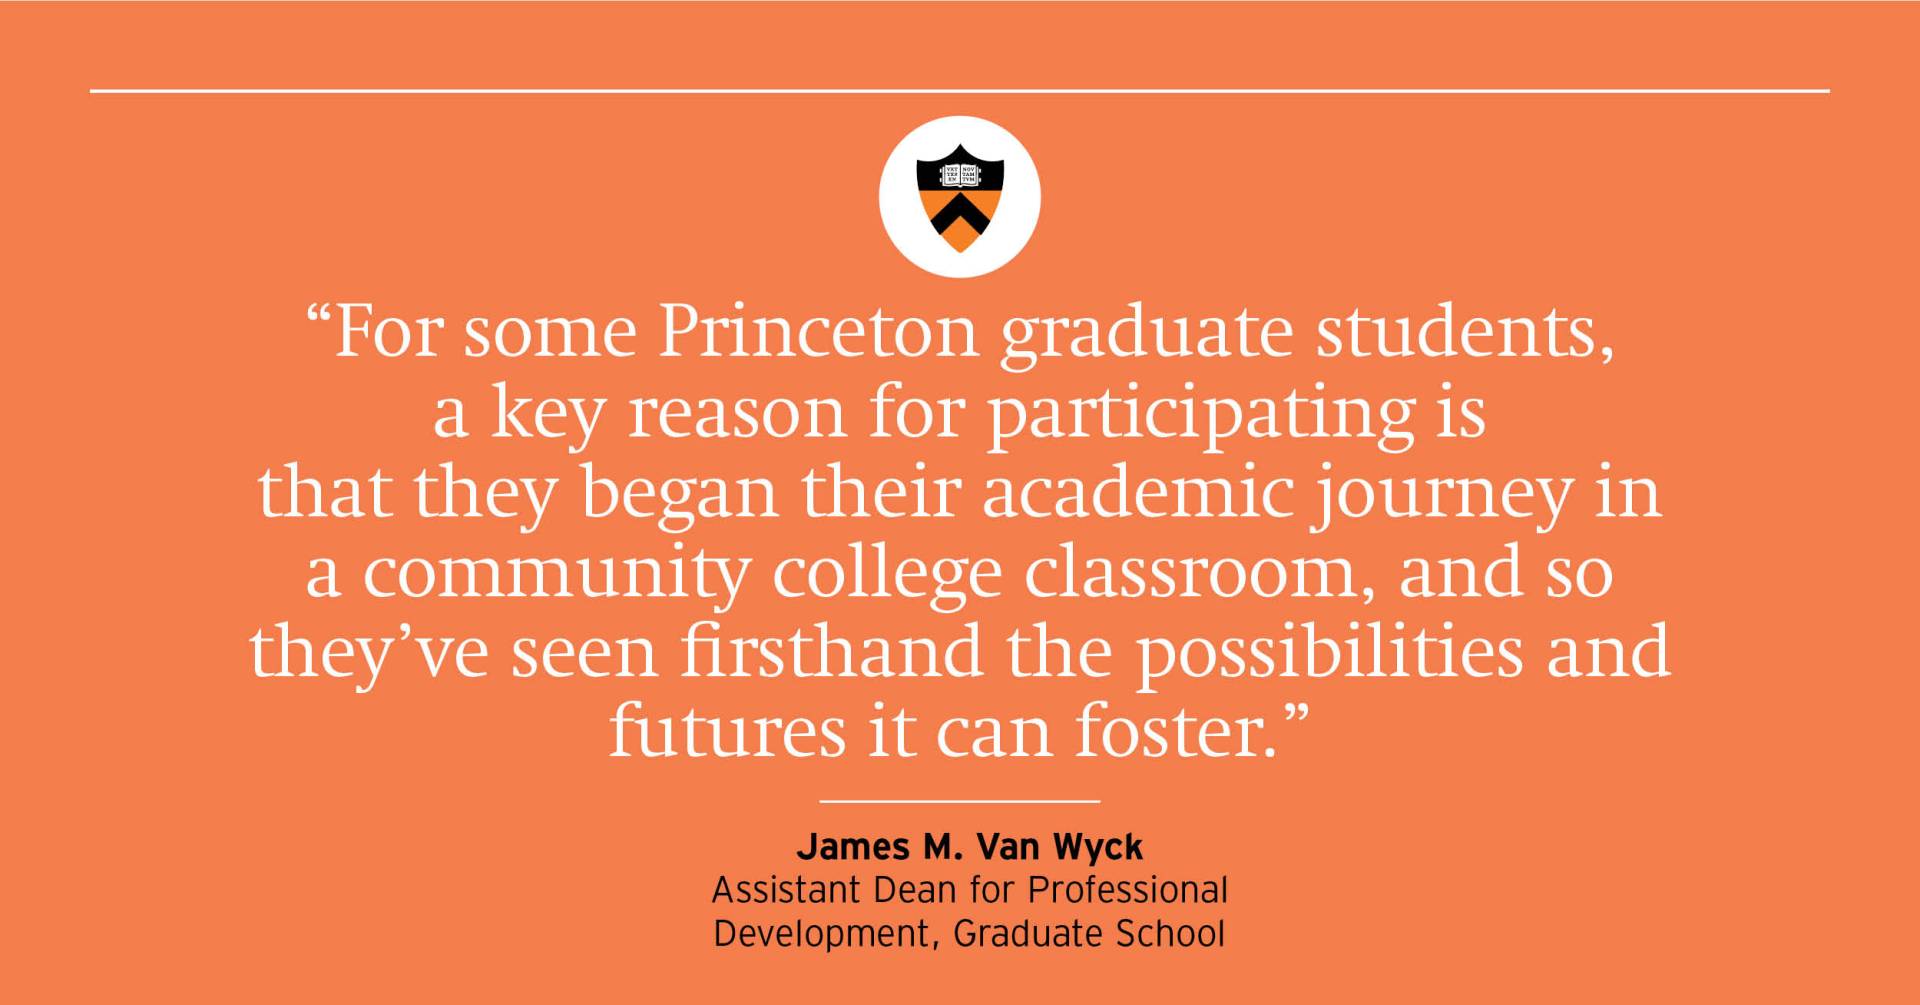 “For some Princeton graduate students, a key reason for participating is that they began their academic journey in a community college classroom, and so they’ve seen firsthand the possibilities and futures it can foster.” — James M. Van Wyck, assistant dean for professional development, Graduate School